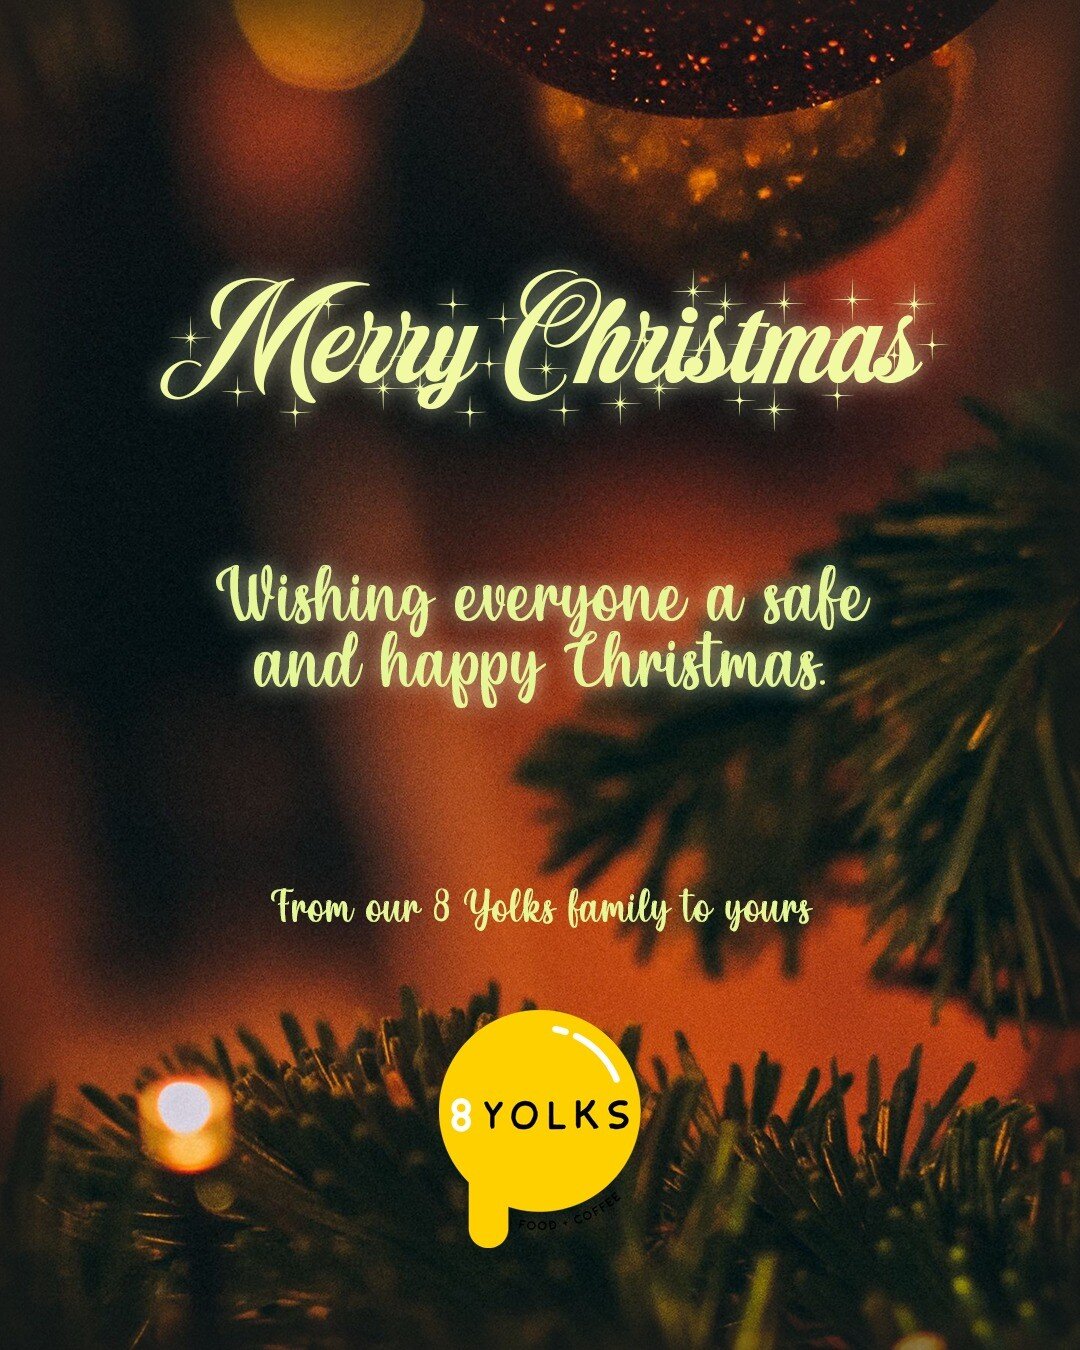 Merry Christmas from our 8 Yolks family to yours.